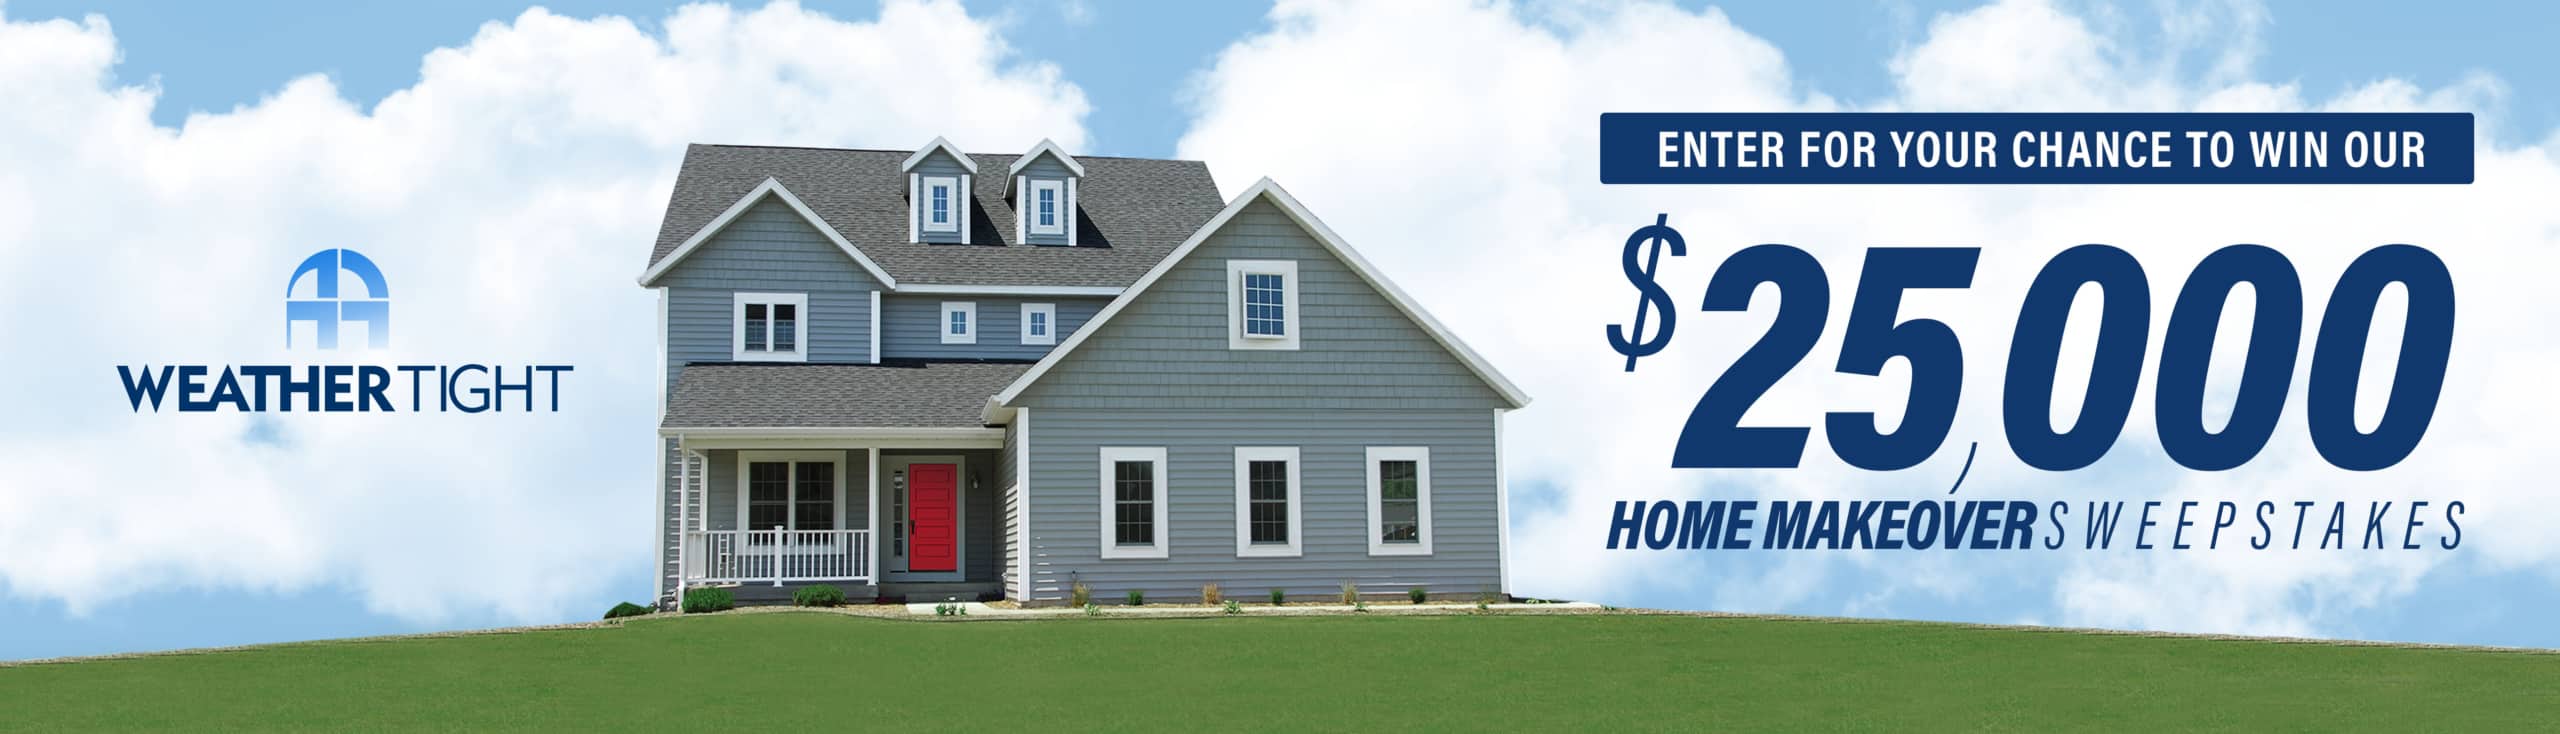 Enter for your chance to win our $25,000 Home Makeover Sweepstakes